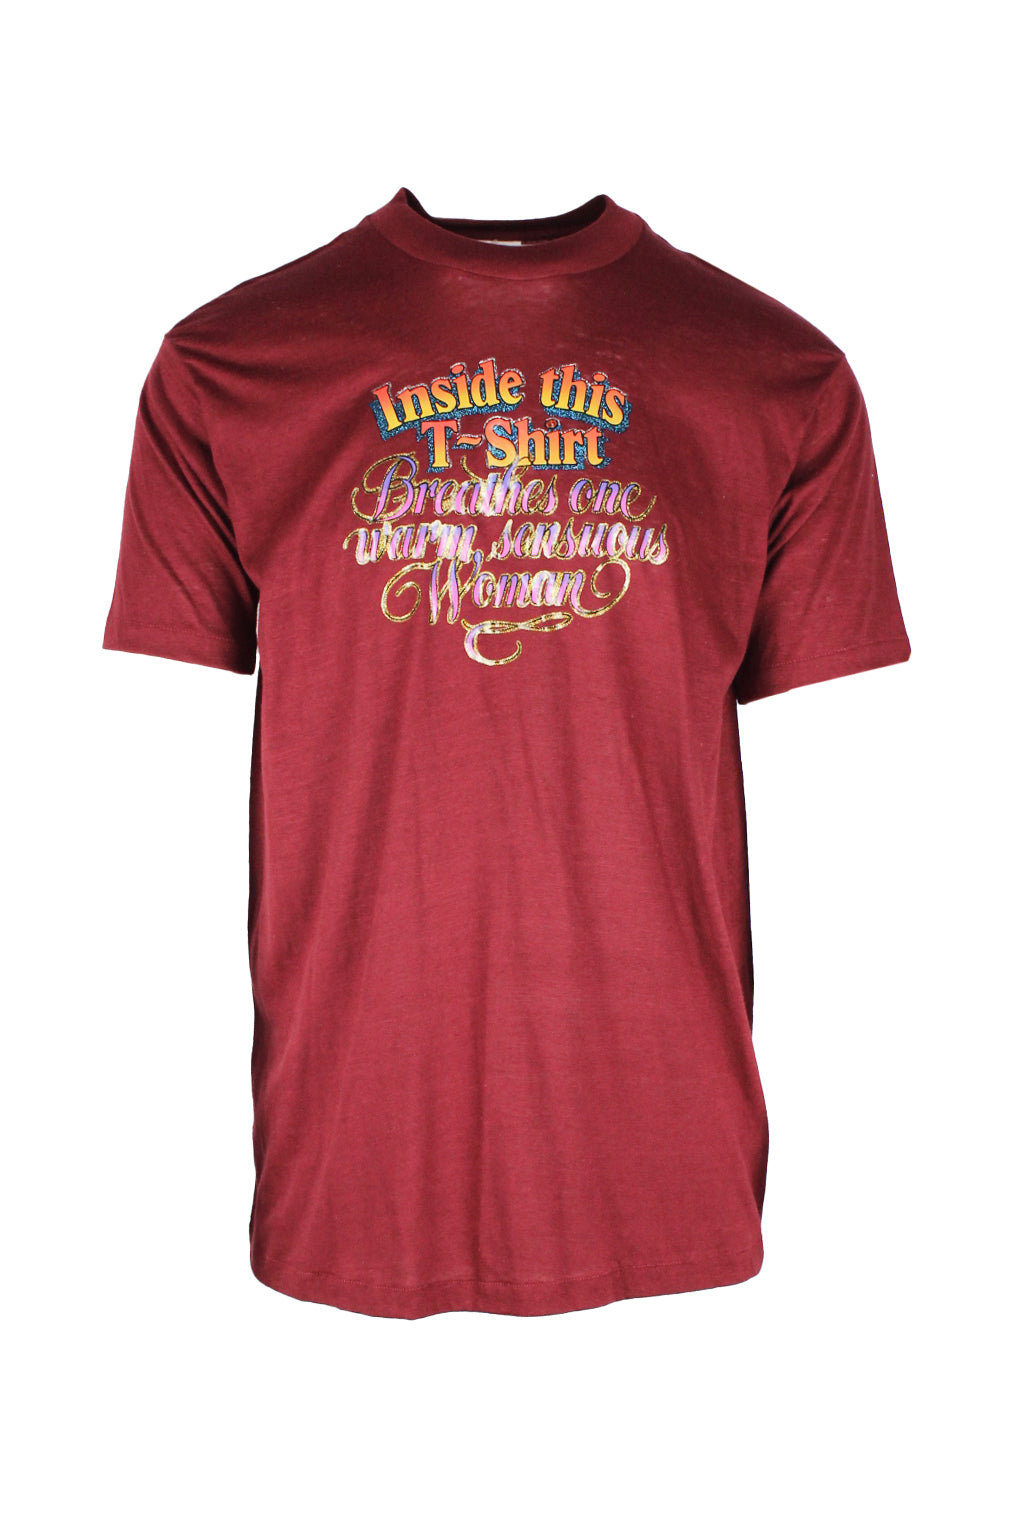 front view of vintage maroon bantams t-shirt. features ‘inside this t-shirt breathes one warm sensuous woman’ glitter printed at chest with ribbed collar.